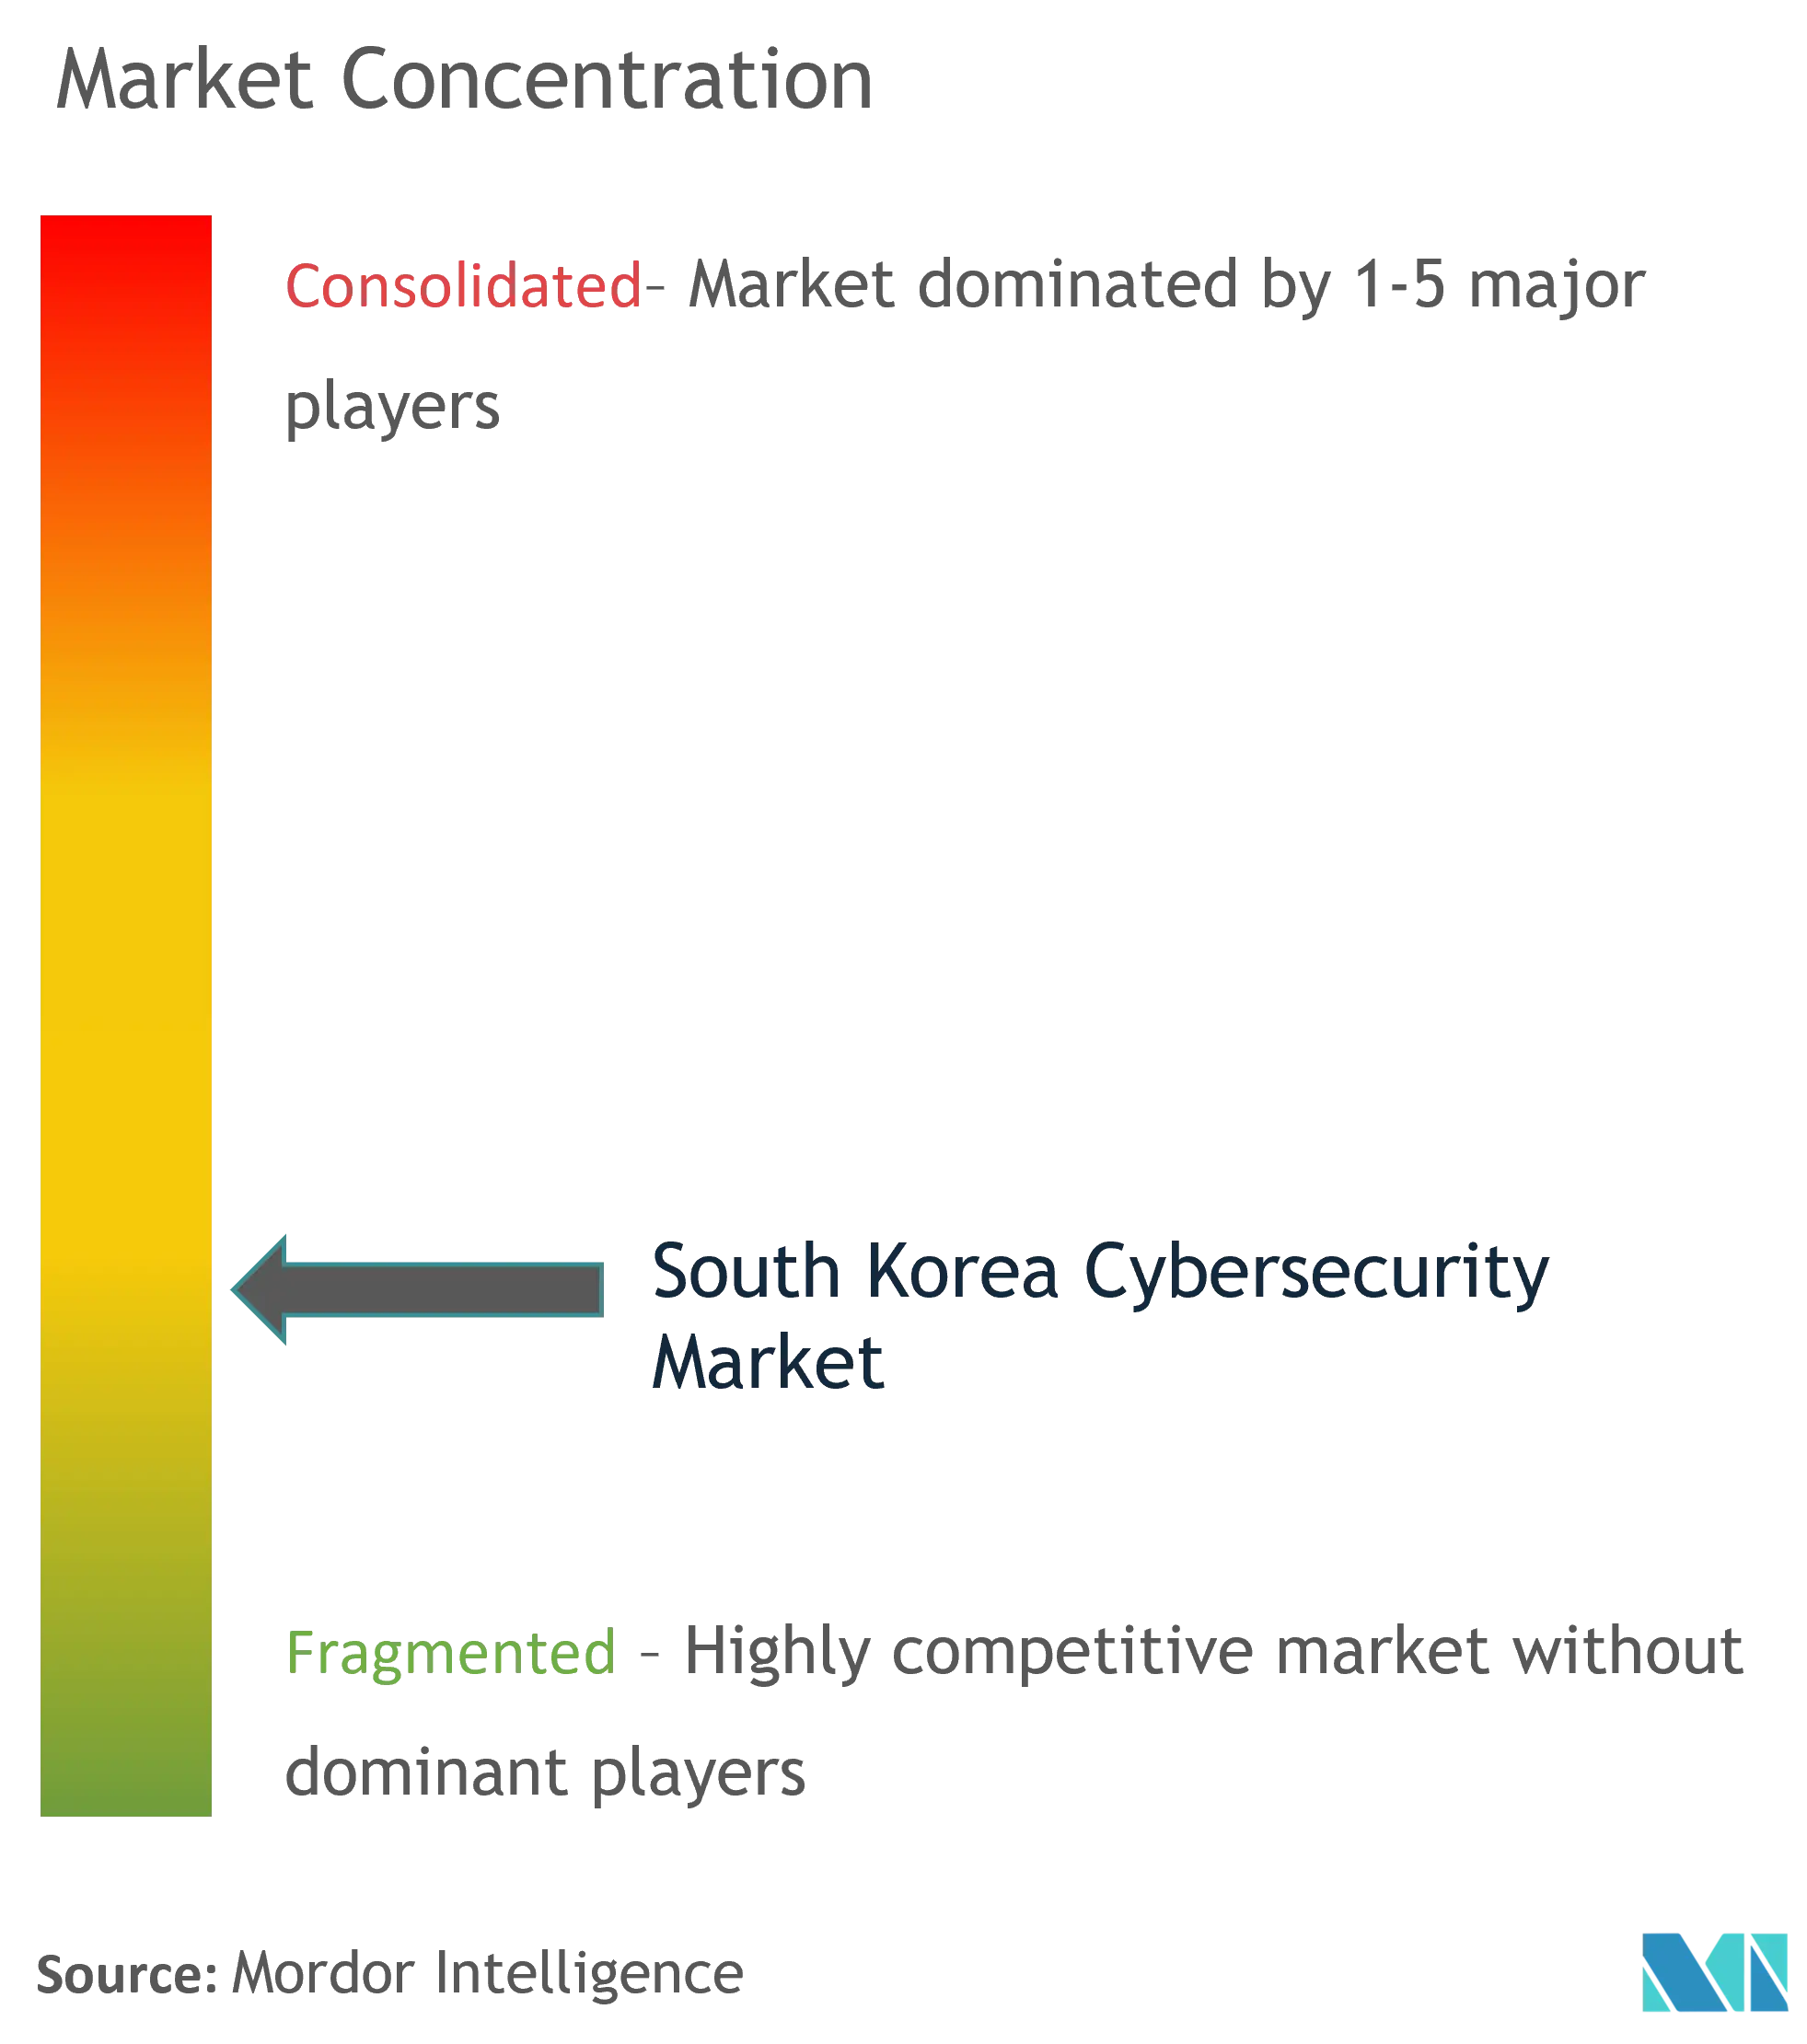 South Korea Cybersecurity Market - Market Concentration.png